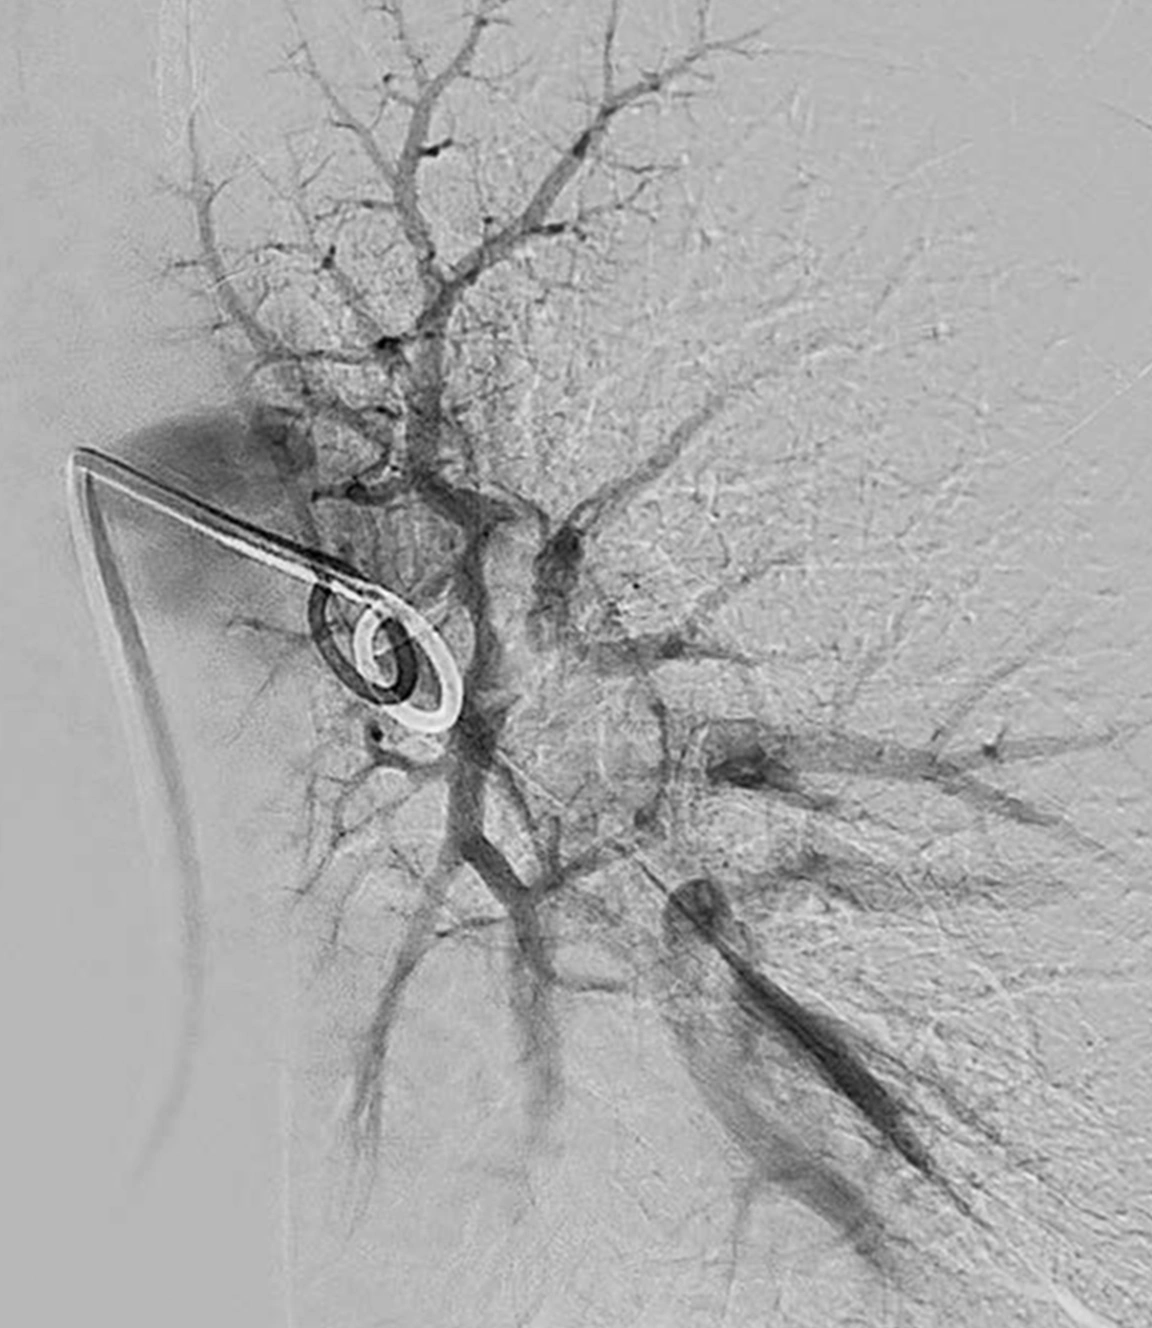 Angiogram of left lung with pulmonary embolism